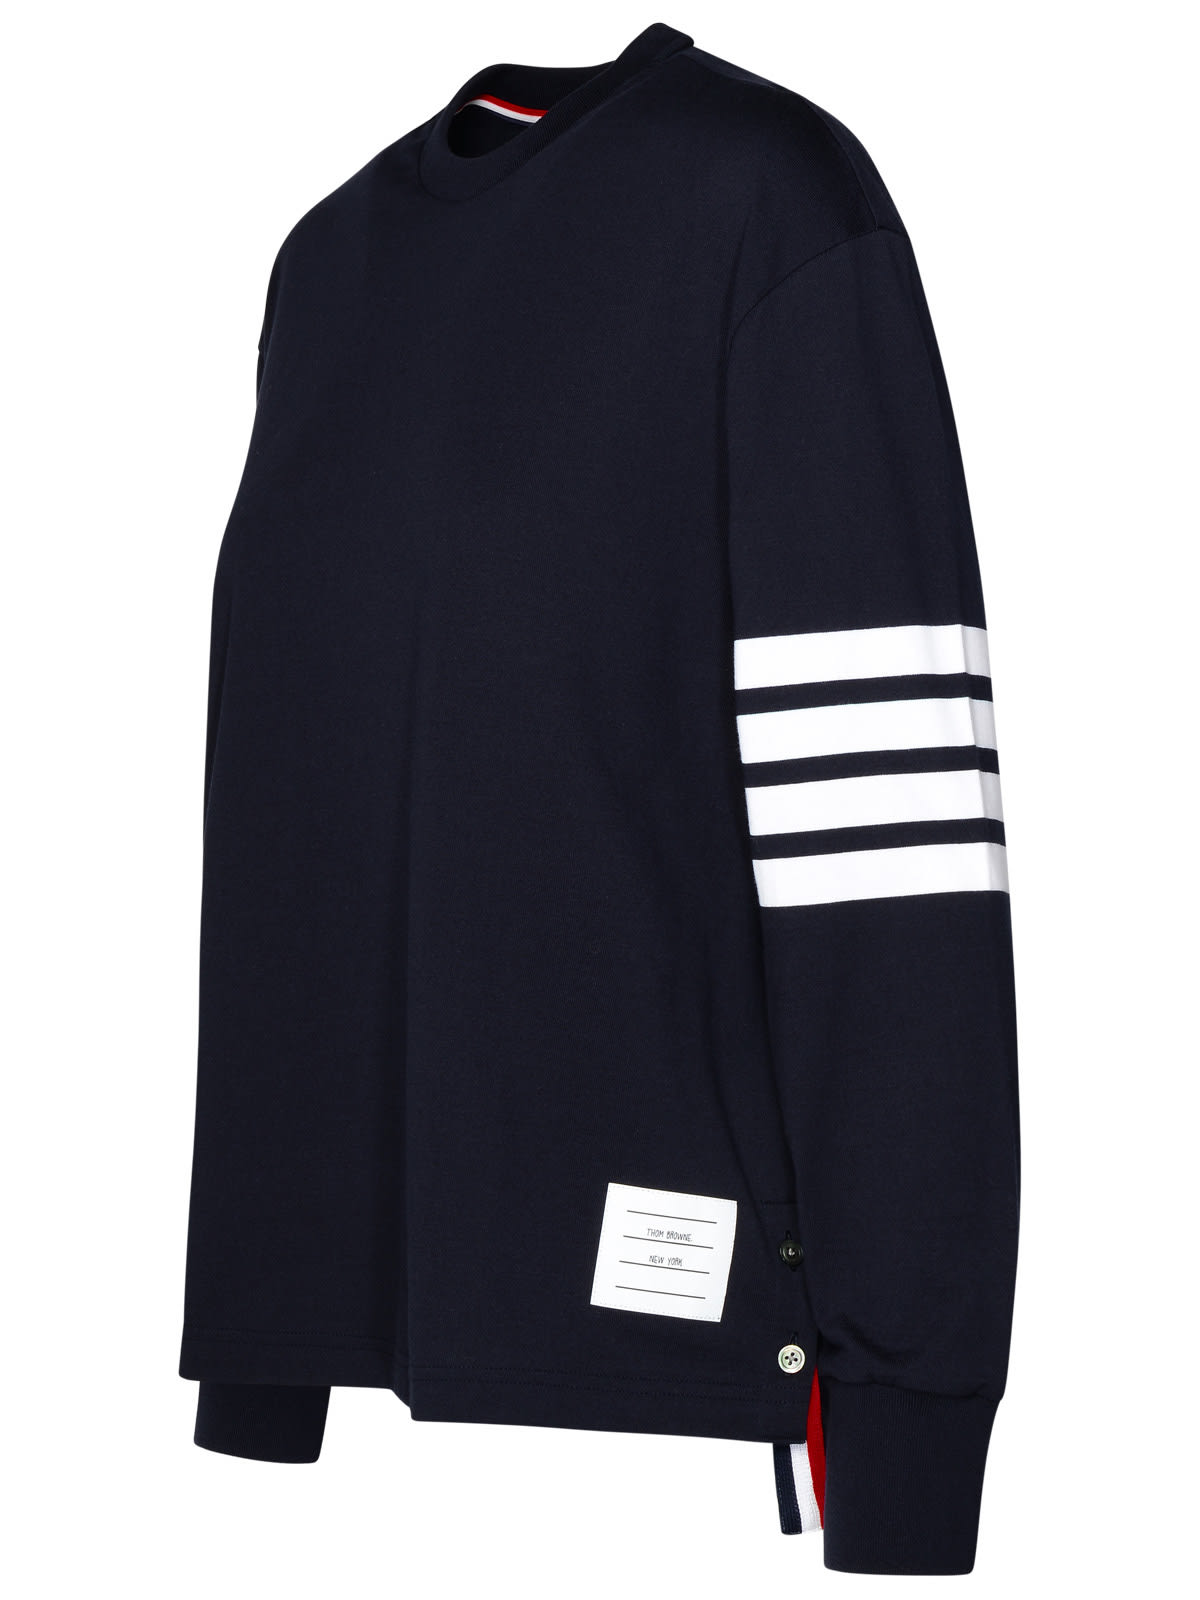 Shop Thom Browne Navy Cotton Sweater